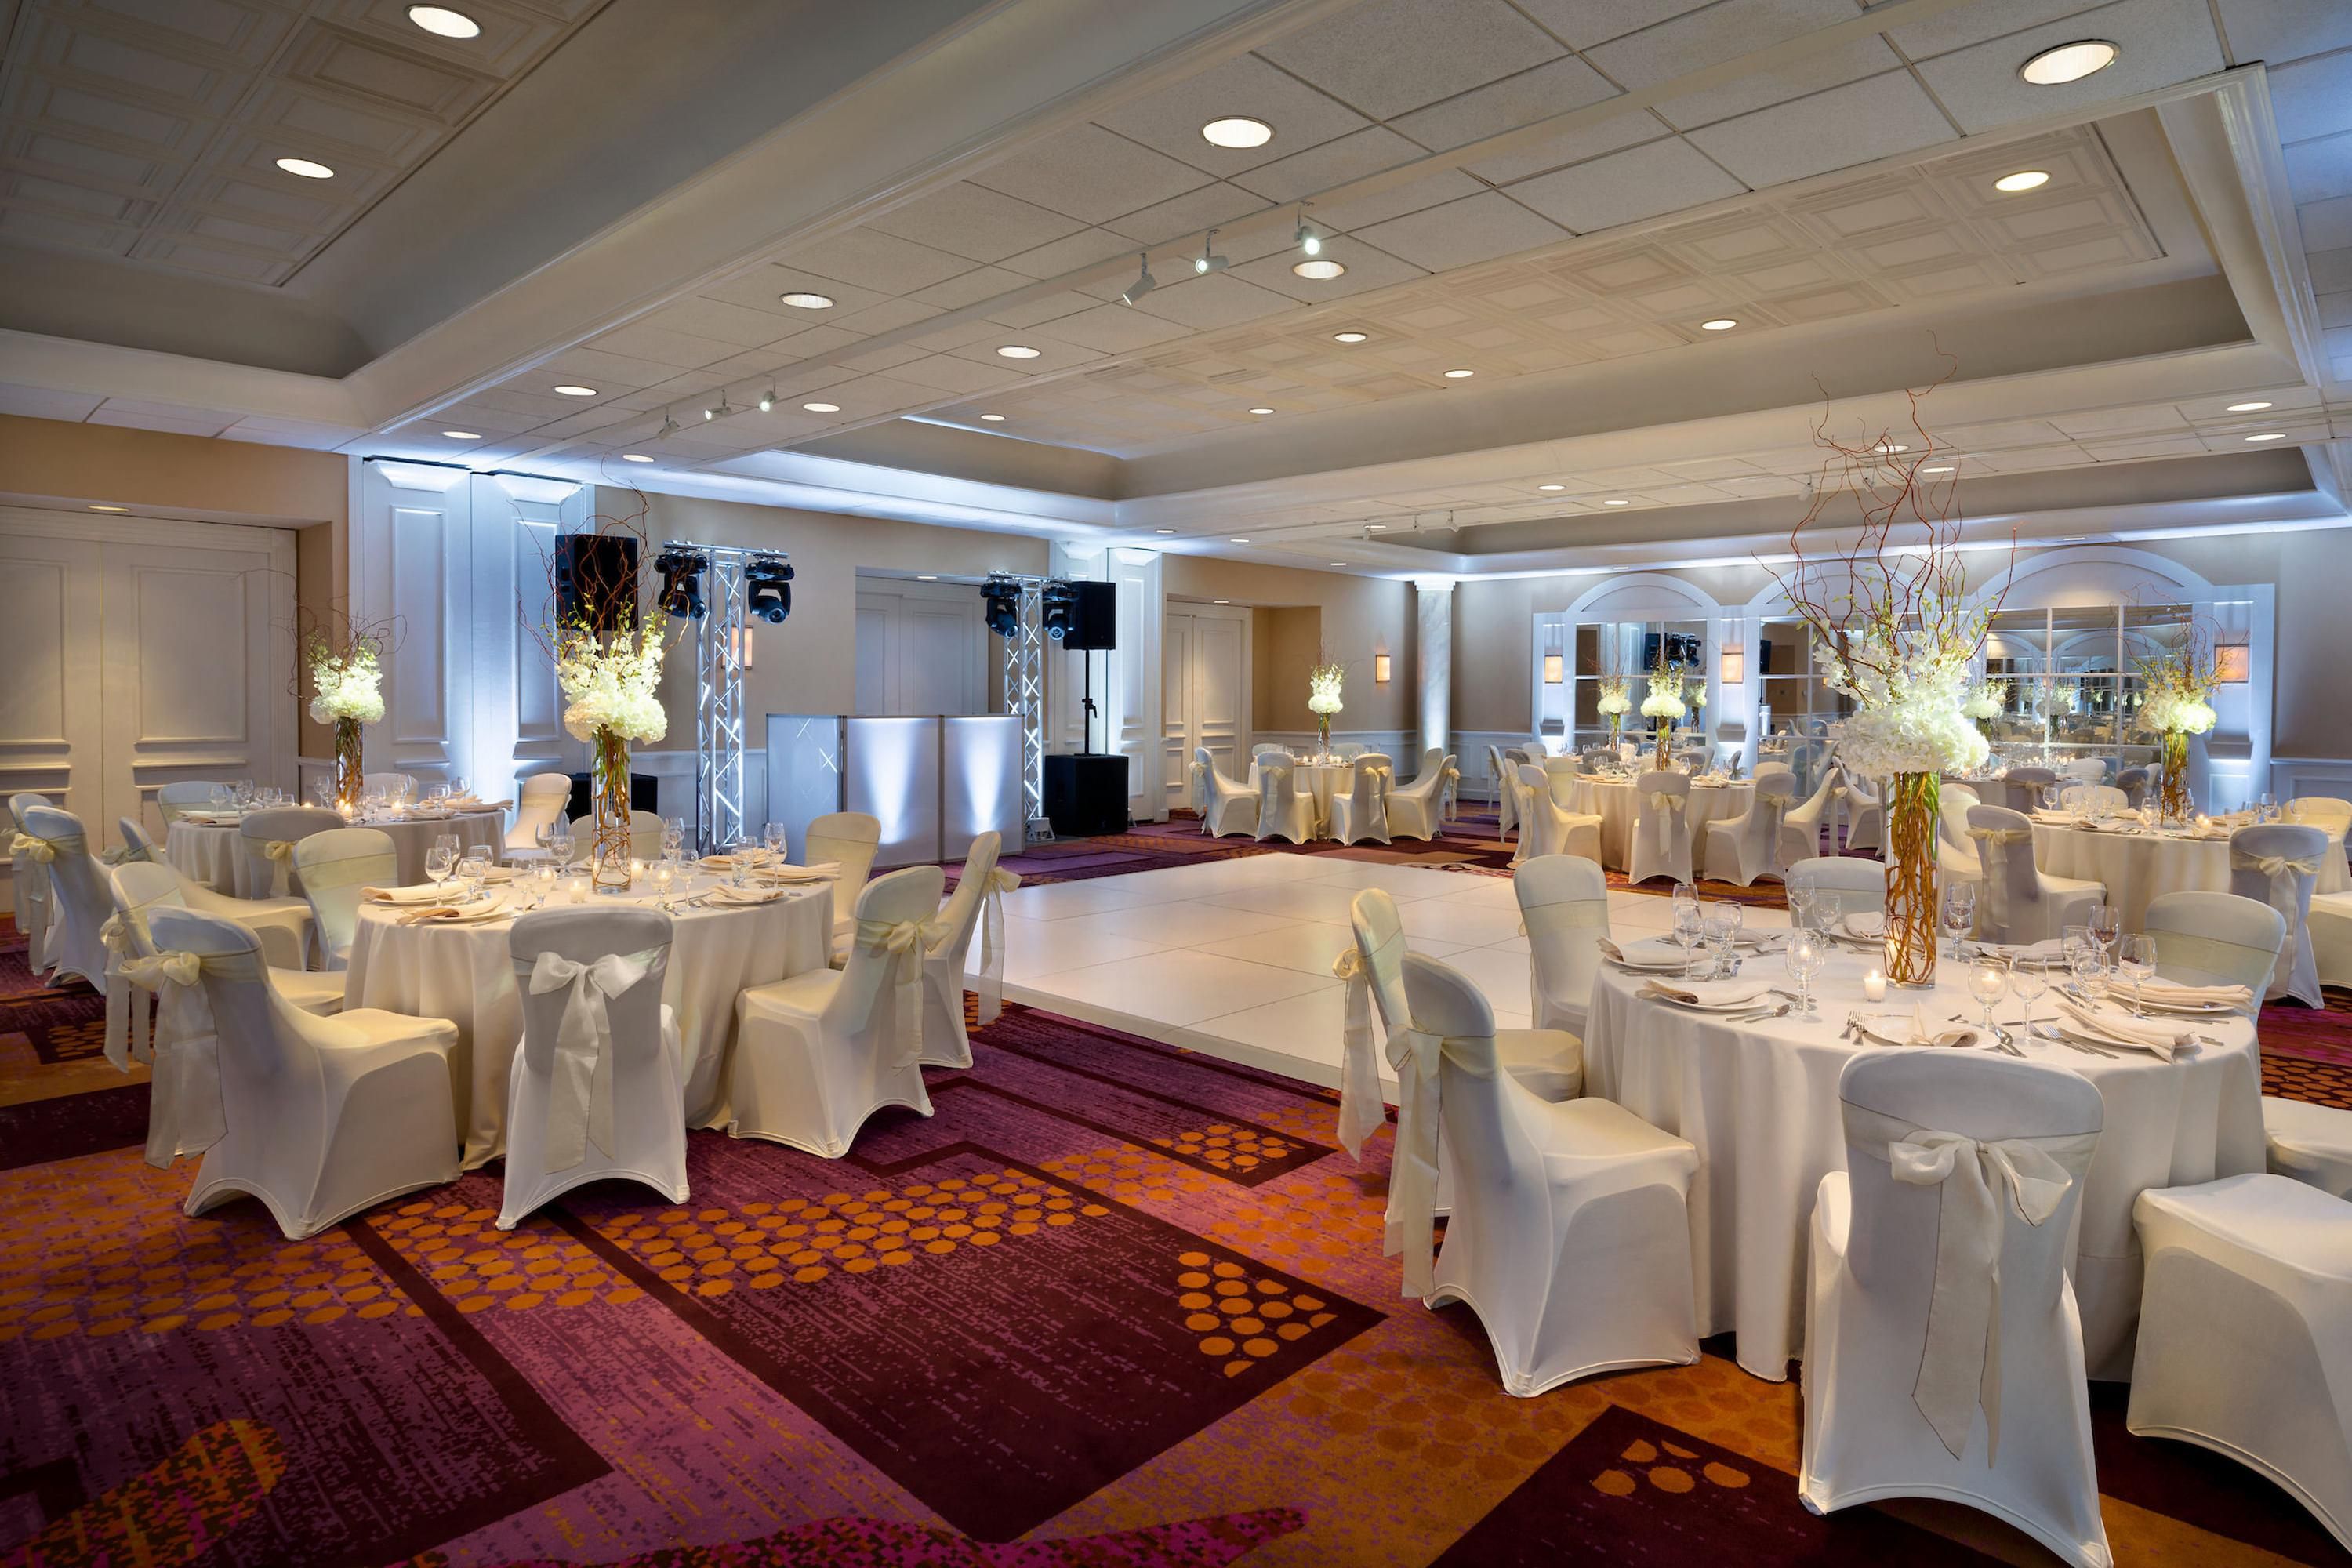 Plan your Englewood wedding or social event in our Grand Ballroom